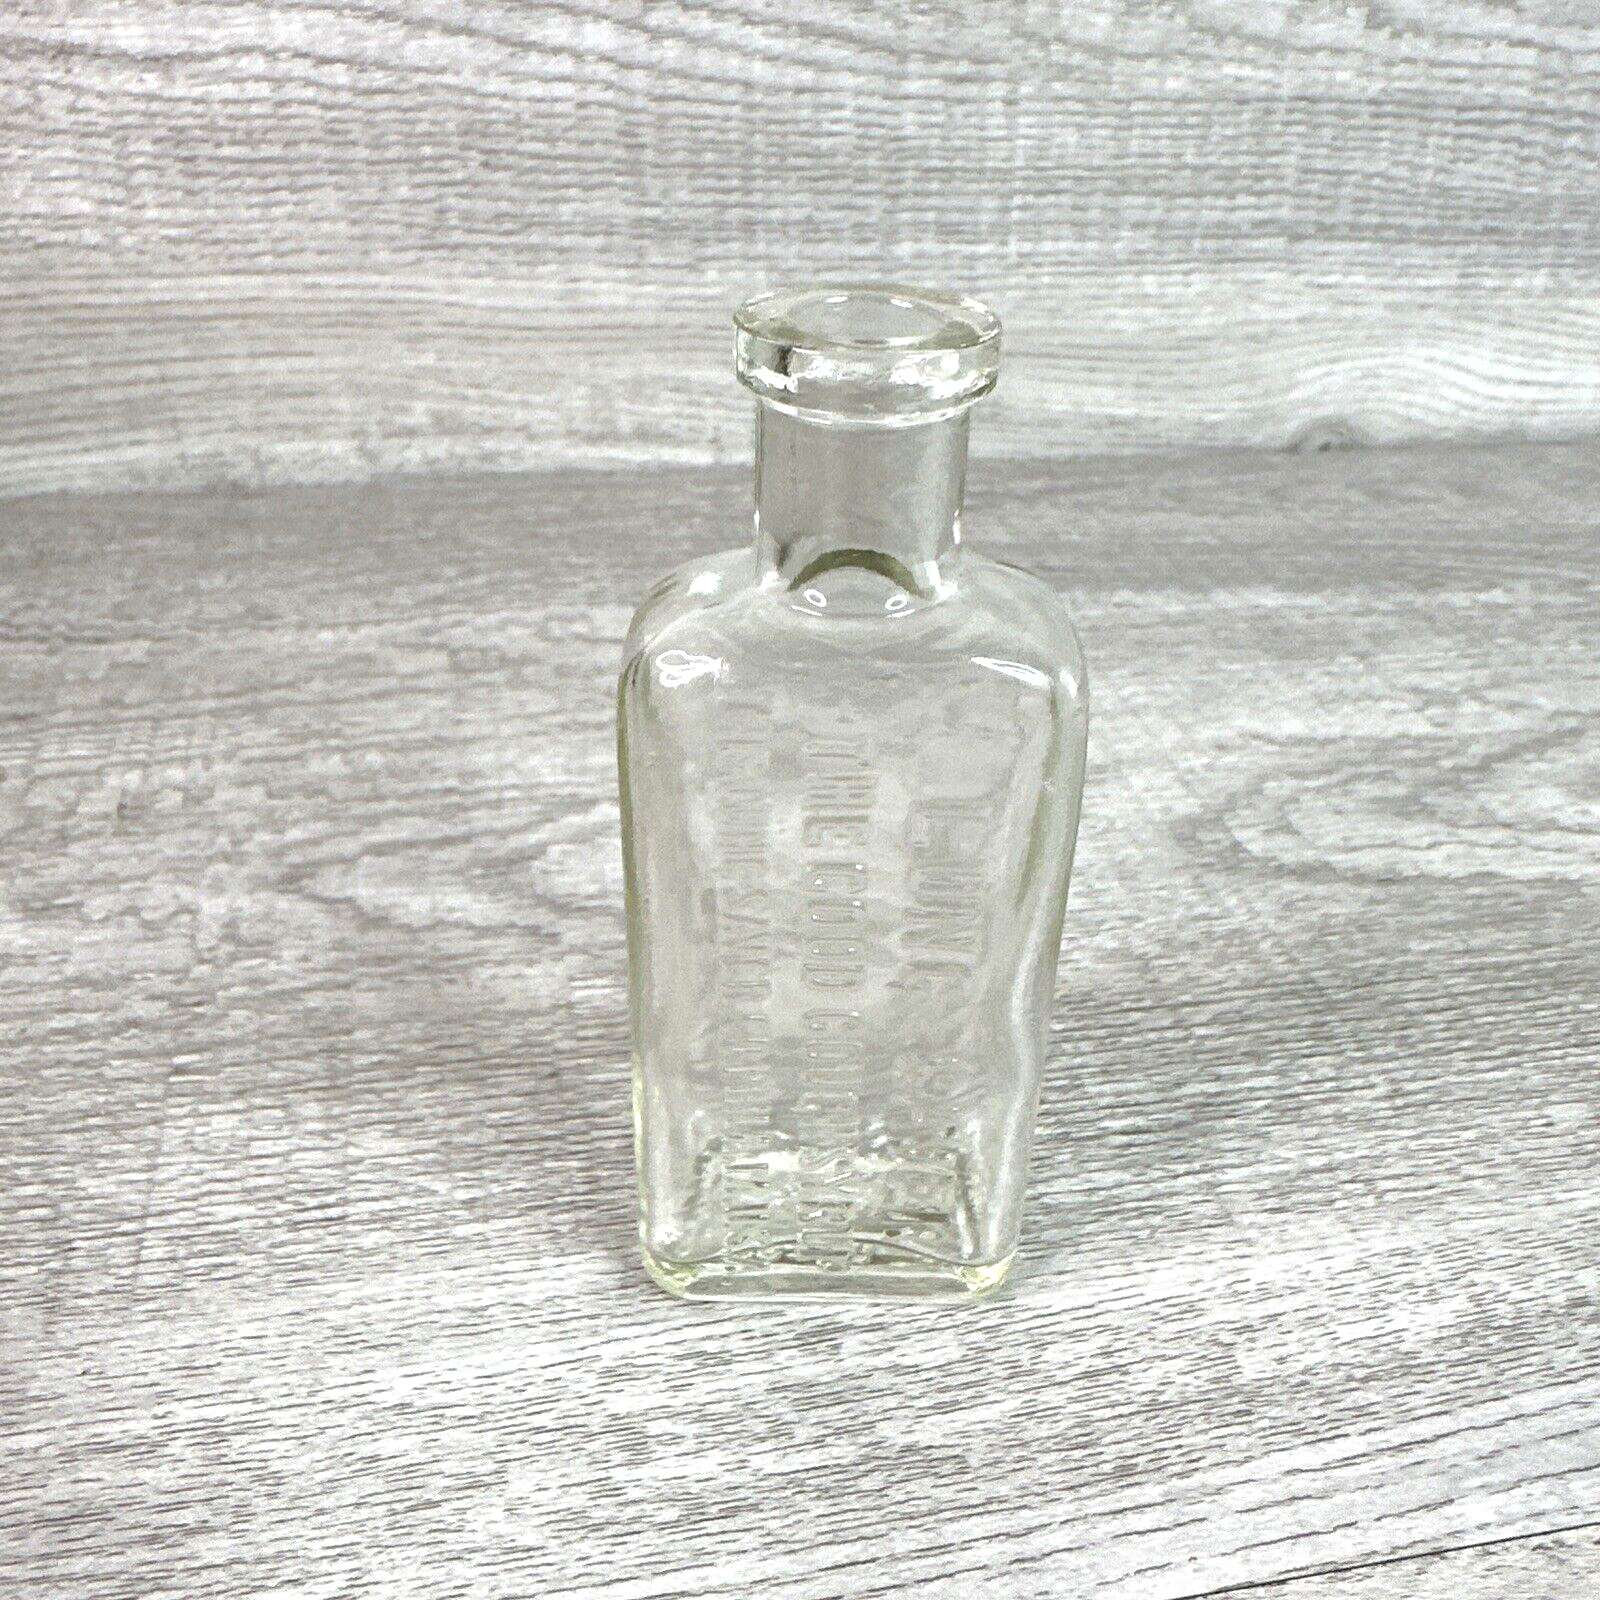 Vintage Lung Saver The Good Cough Syrup Phil’s Pa USA Clear Bottle